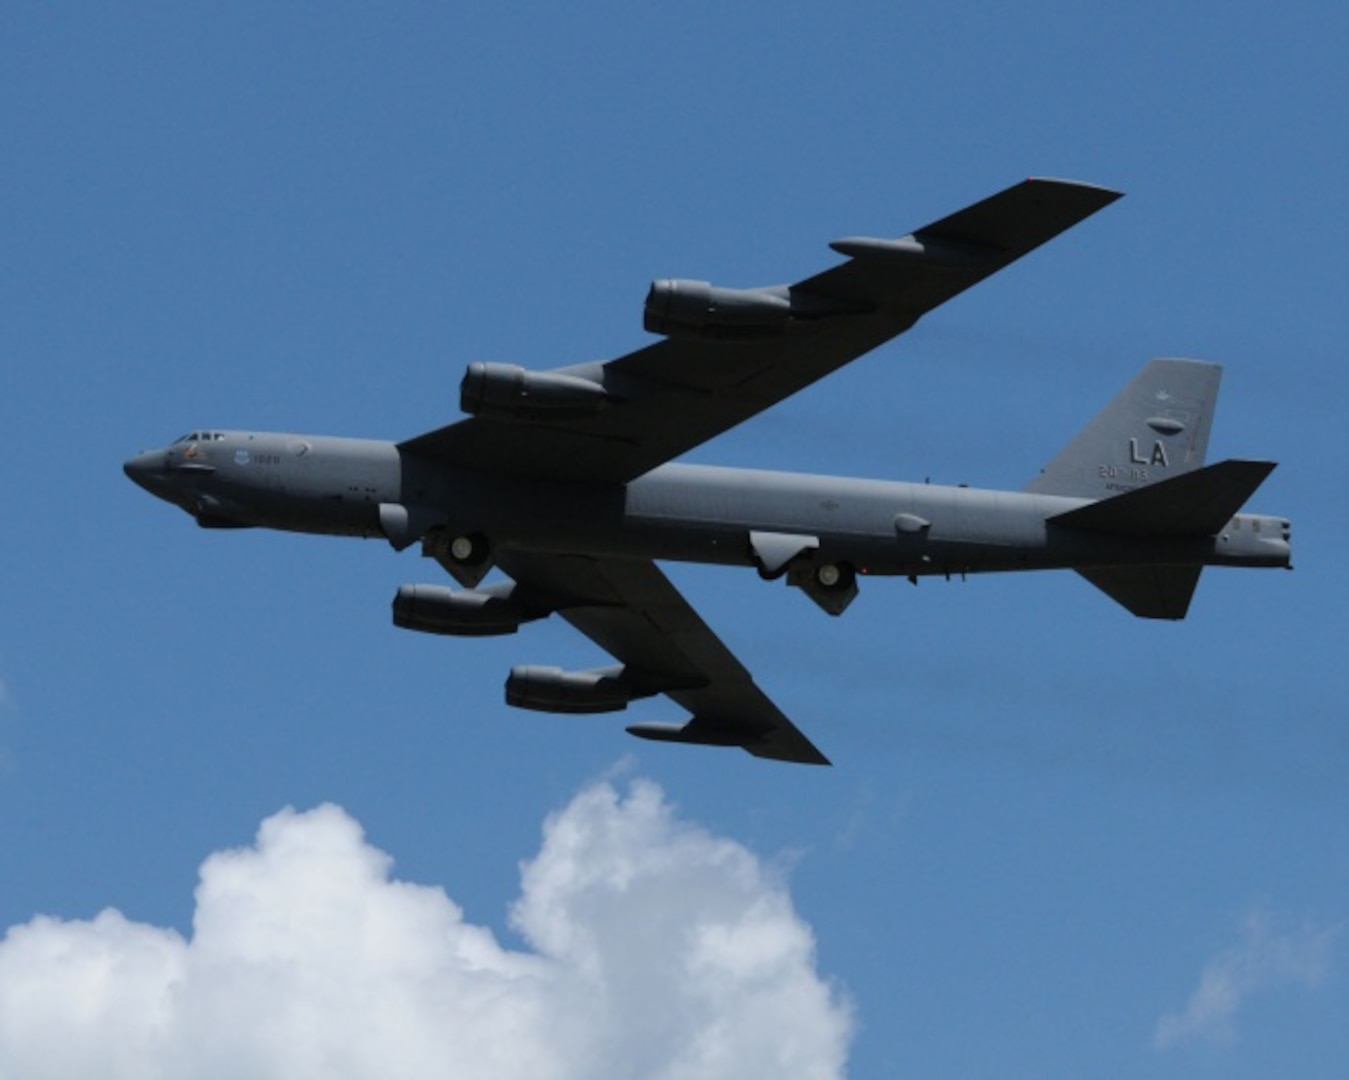 A B-52 Stratofortress from the 2nd Bomb Wing, Barksdale AFB, LA, prepares to land at the Sioux Gateway Airport / Col. Bud Day Field, in Sioux City, Iowa. The B-52 will be on display at the "Air and Ag Show" hosted by the 185th Air Refueling Wing.